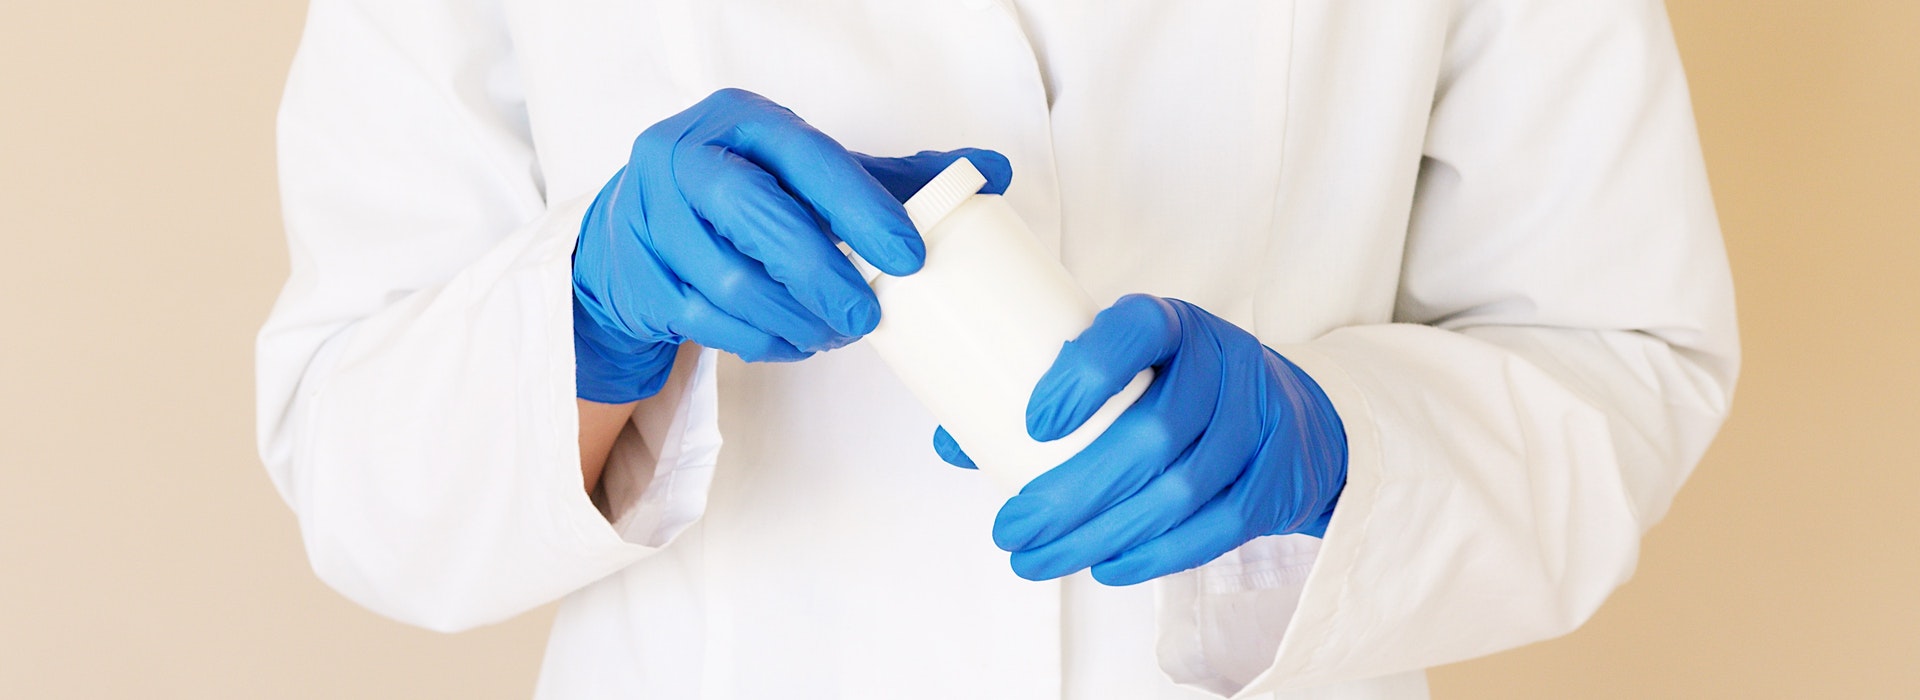 Photo of a person wearing lab coat and blue medical gloves holding a plastic bottle